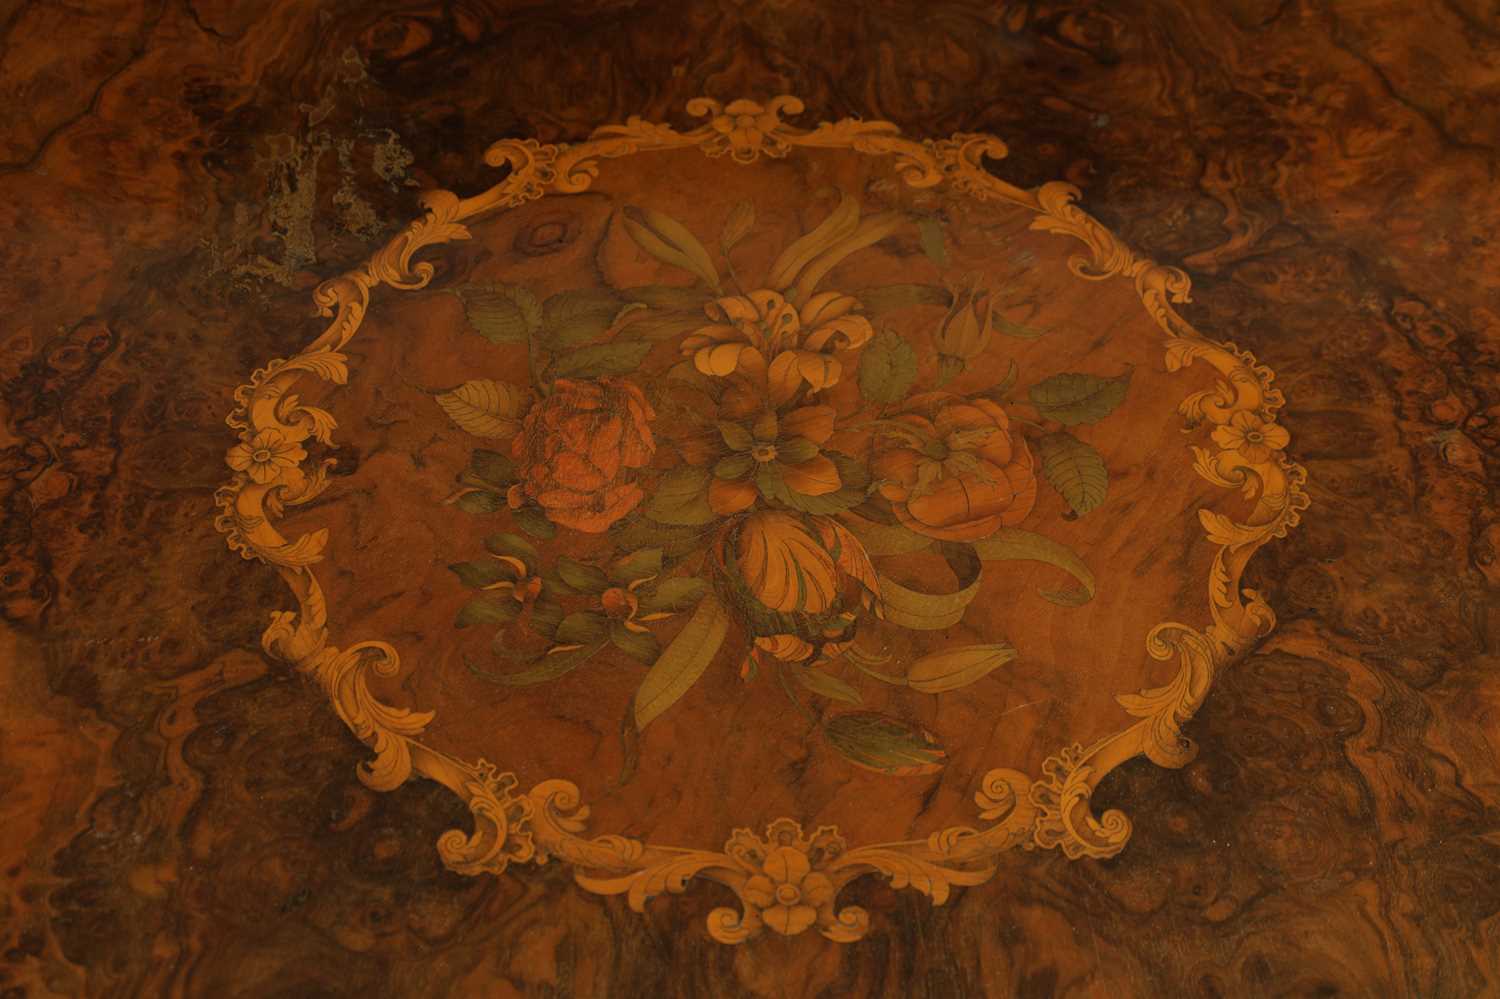 A FINE 19TH CENTURY ORMOLU MOUNTED BURR WALNUT AND FLORAL MARQUETRY CENTRE TABLE IN THE MANNER OF ED - Image 6 of 10